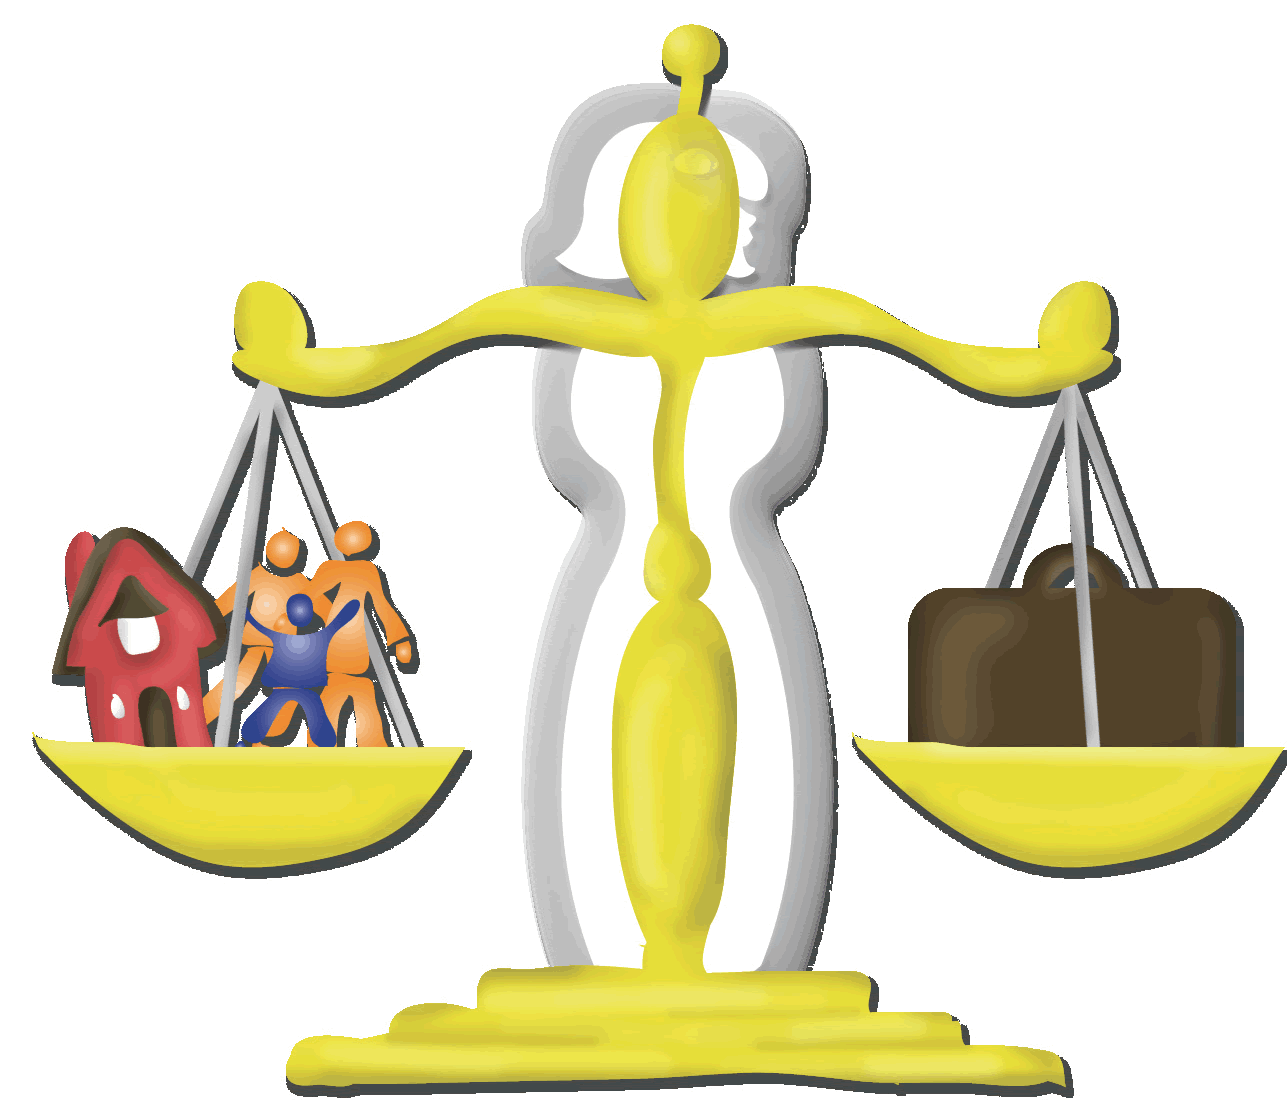 Legal terminology image of. Evidence clipart courtroom